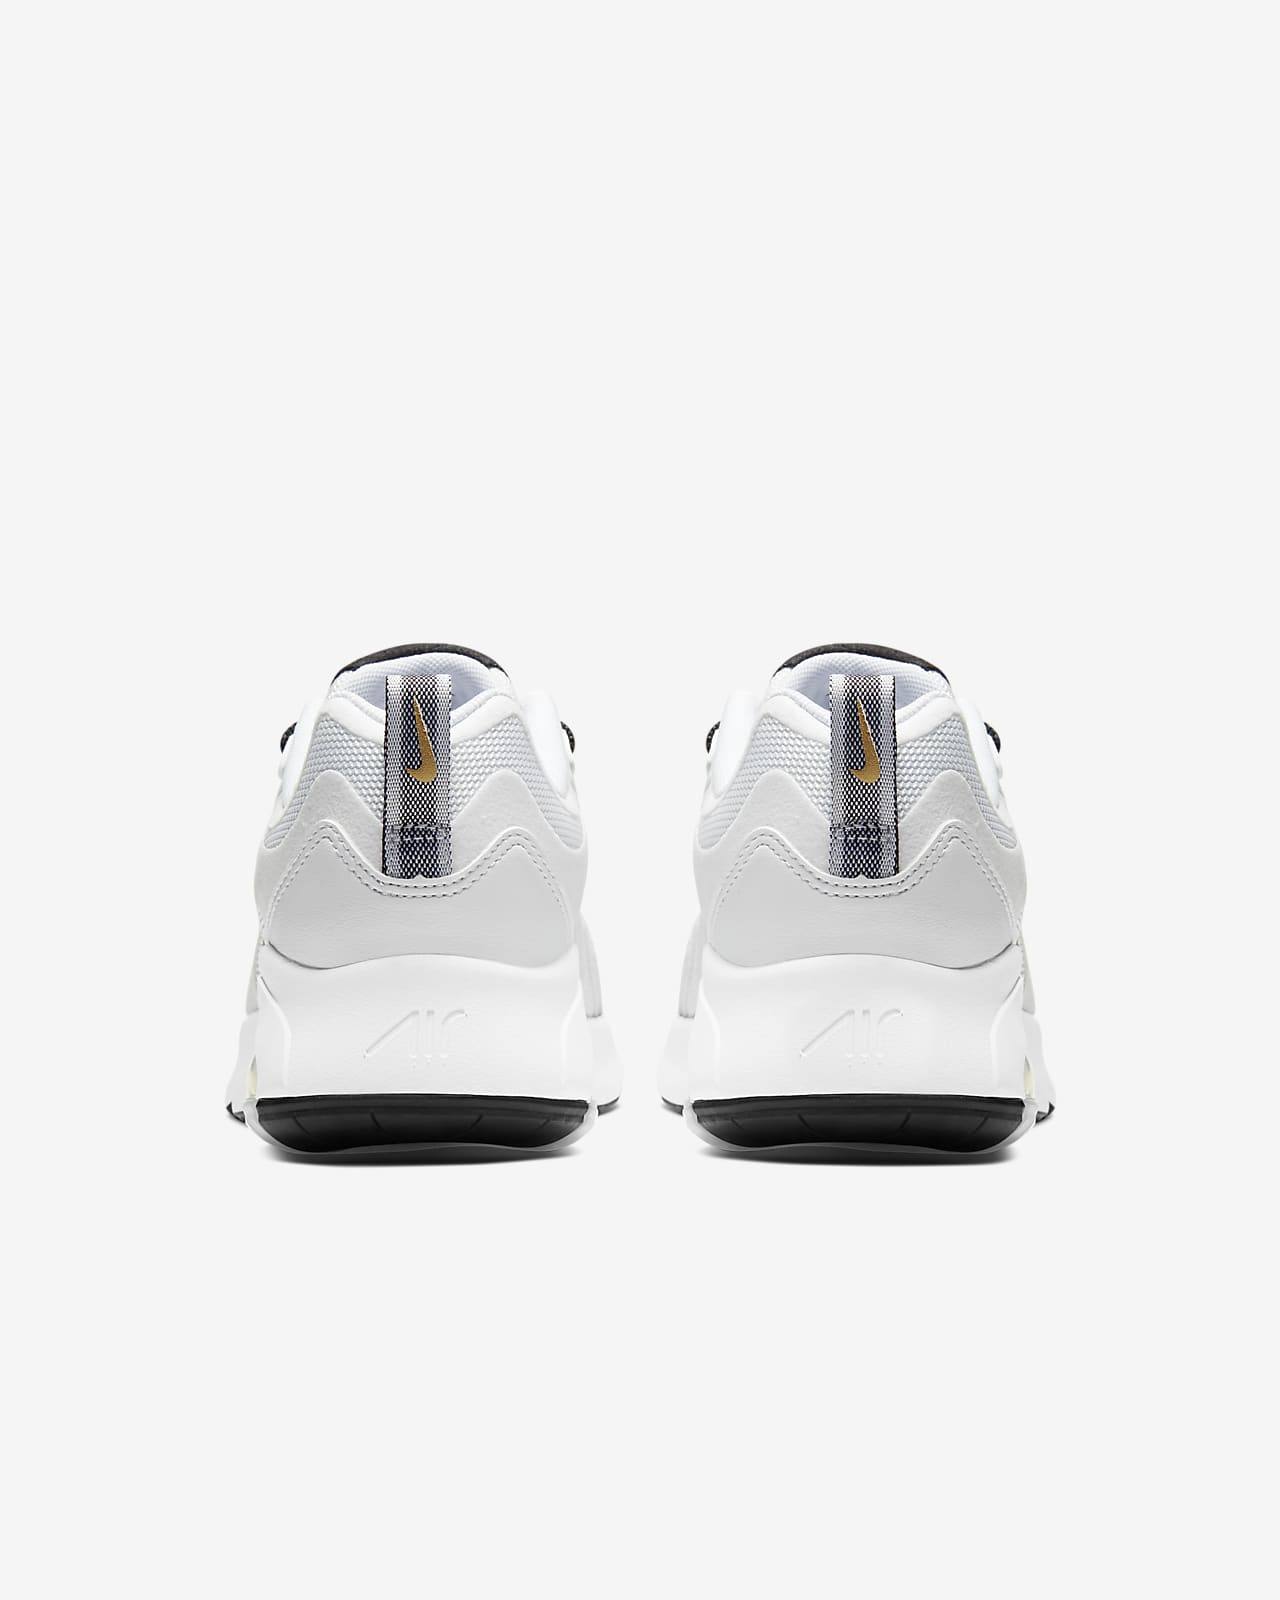 nike air max 200 women's white and gold